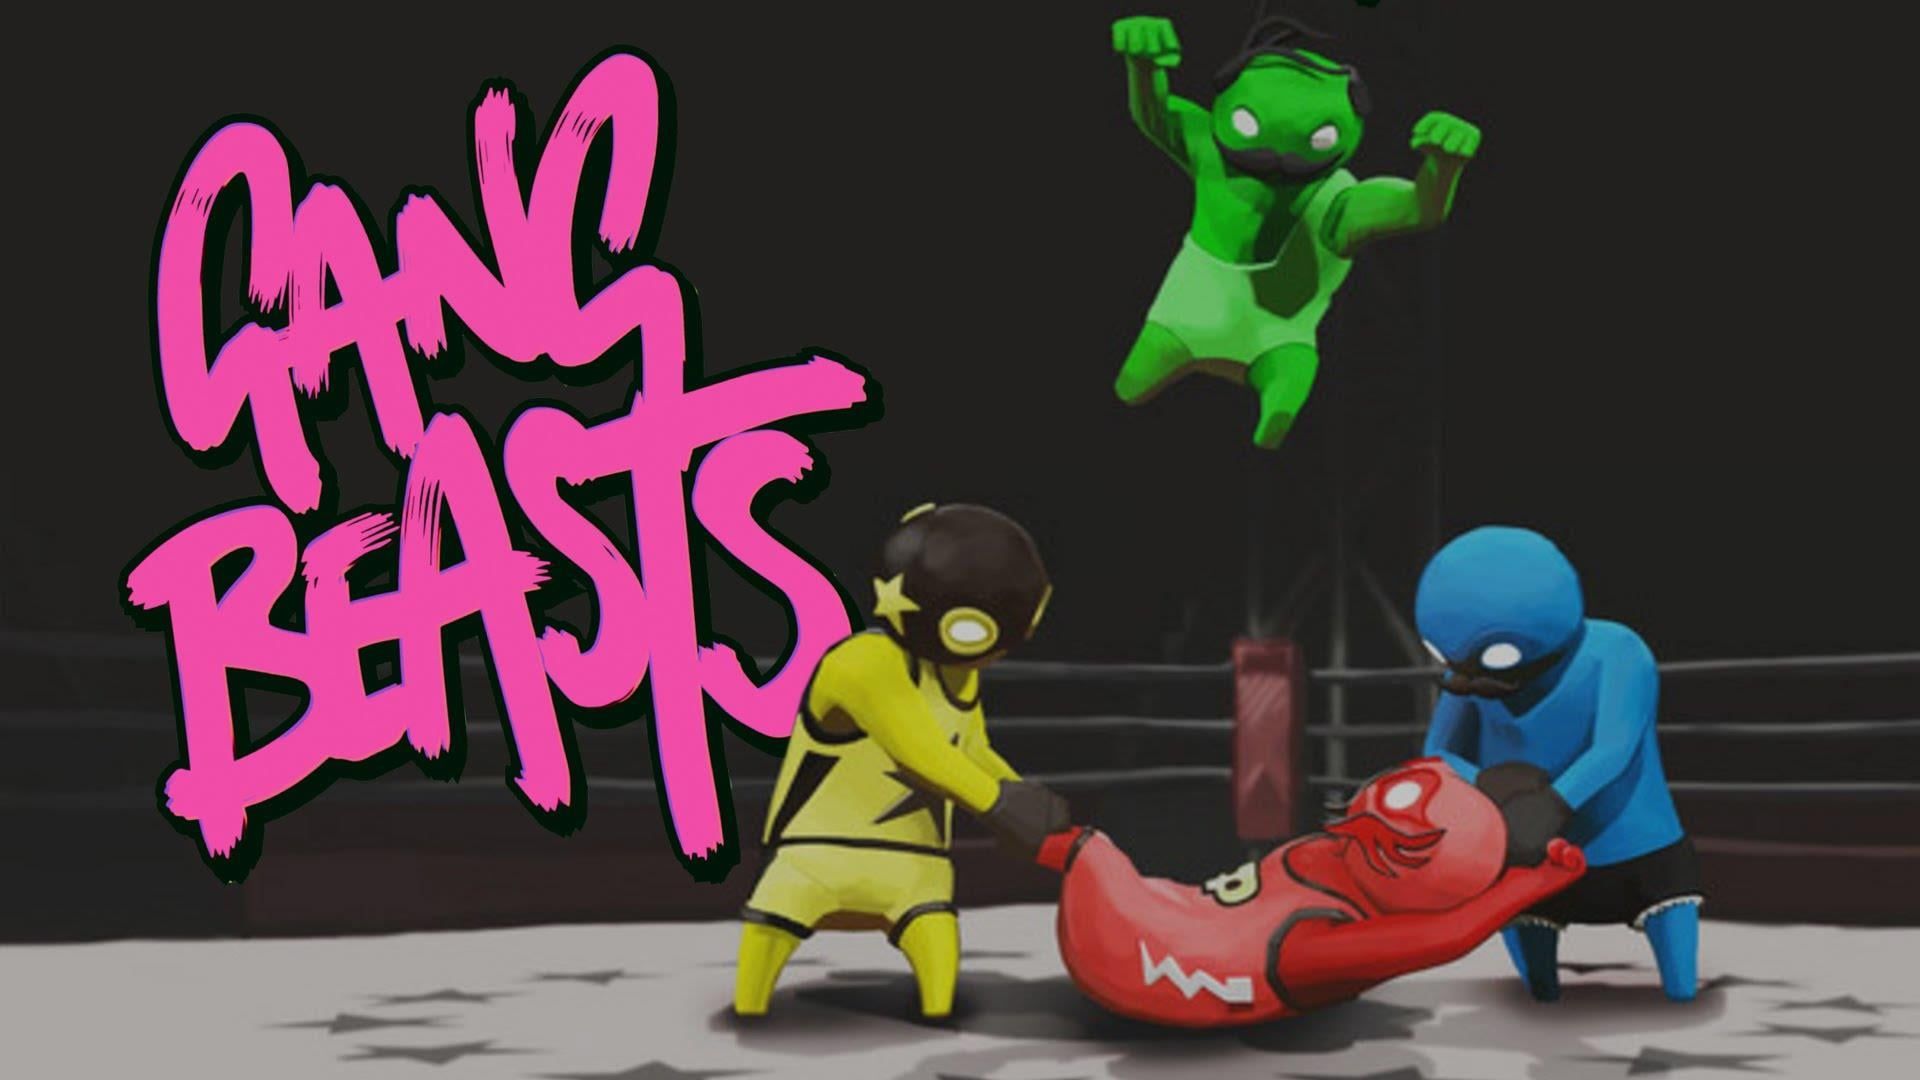 Best games on Xbox Game Pass - Gang Beasts